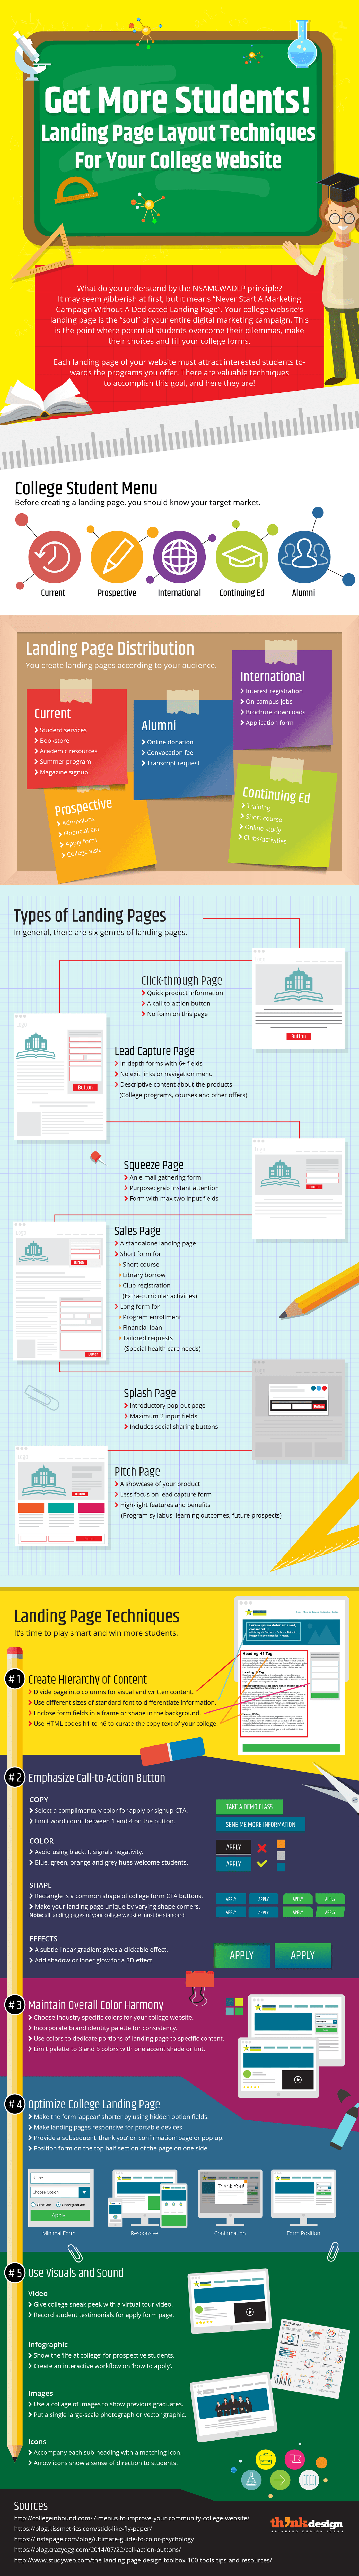 Landing-Page-Layout-Techniques-For-Your-College-Website---Infographic-IG-min